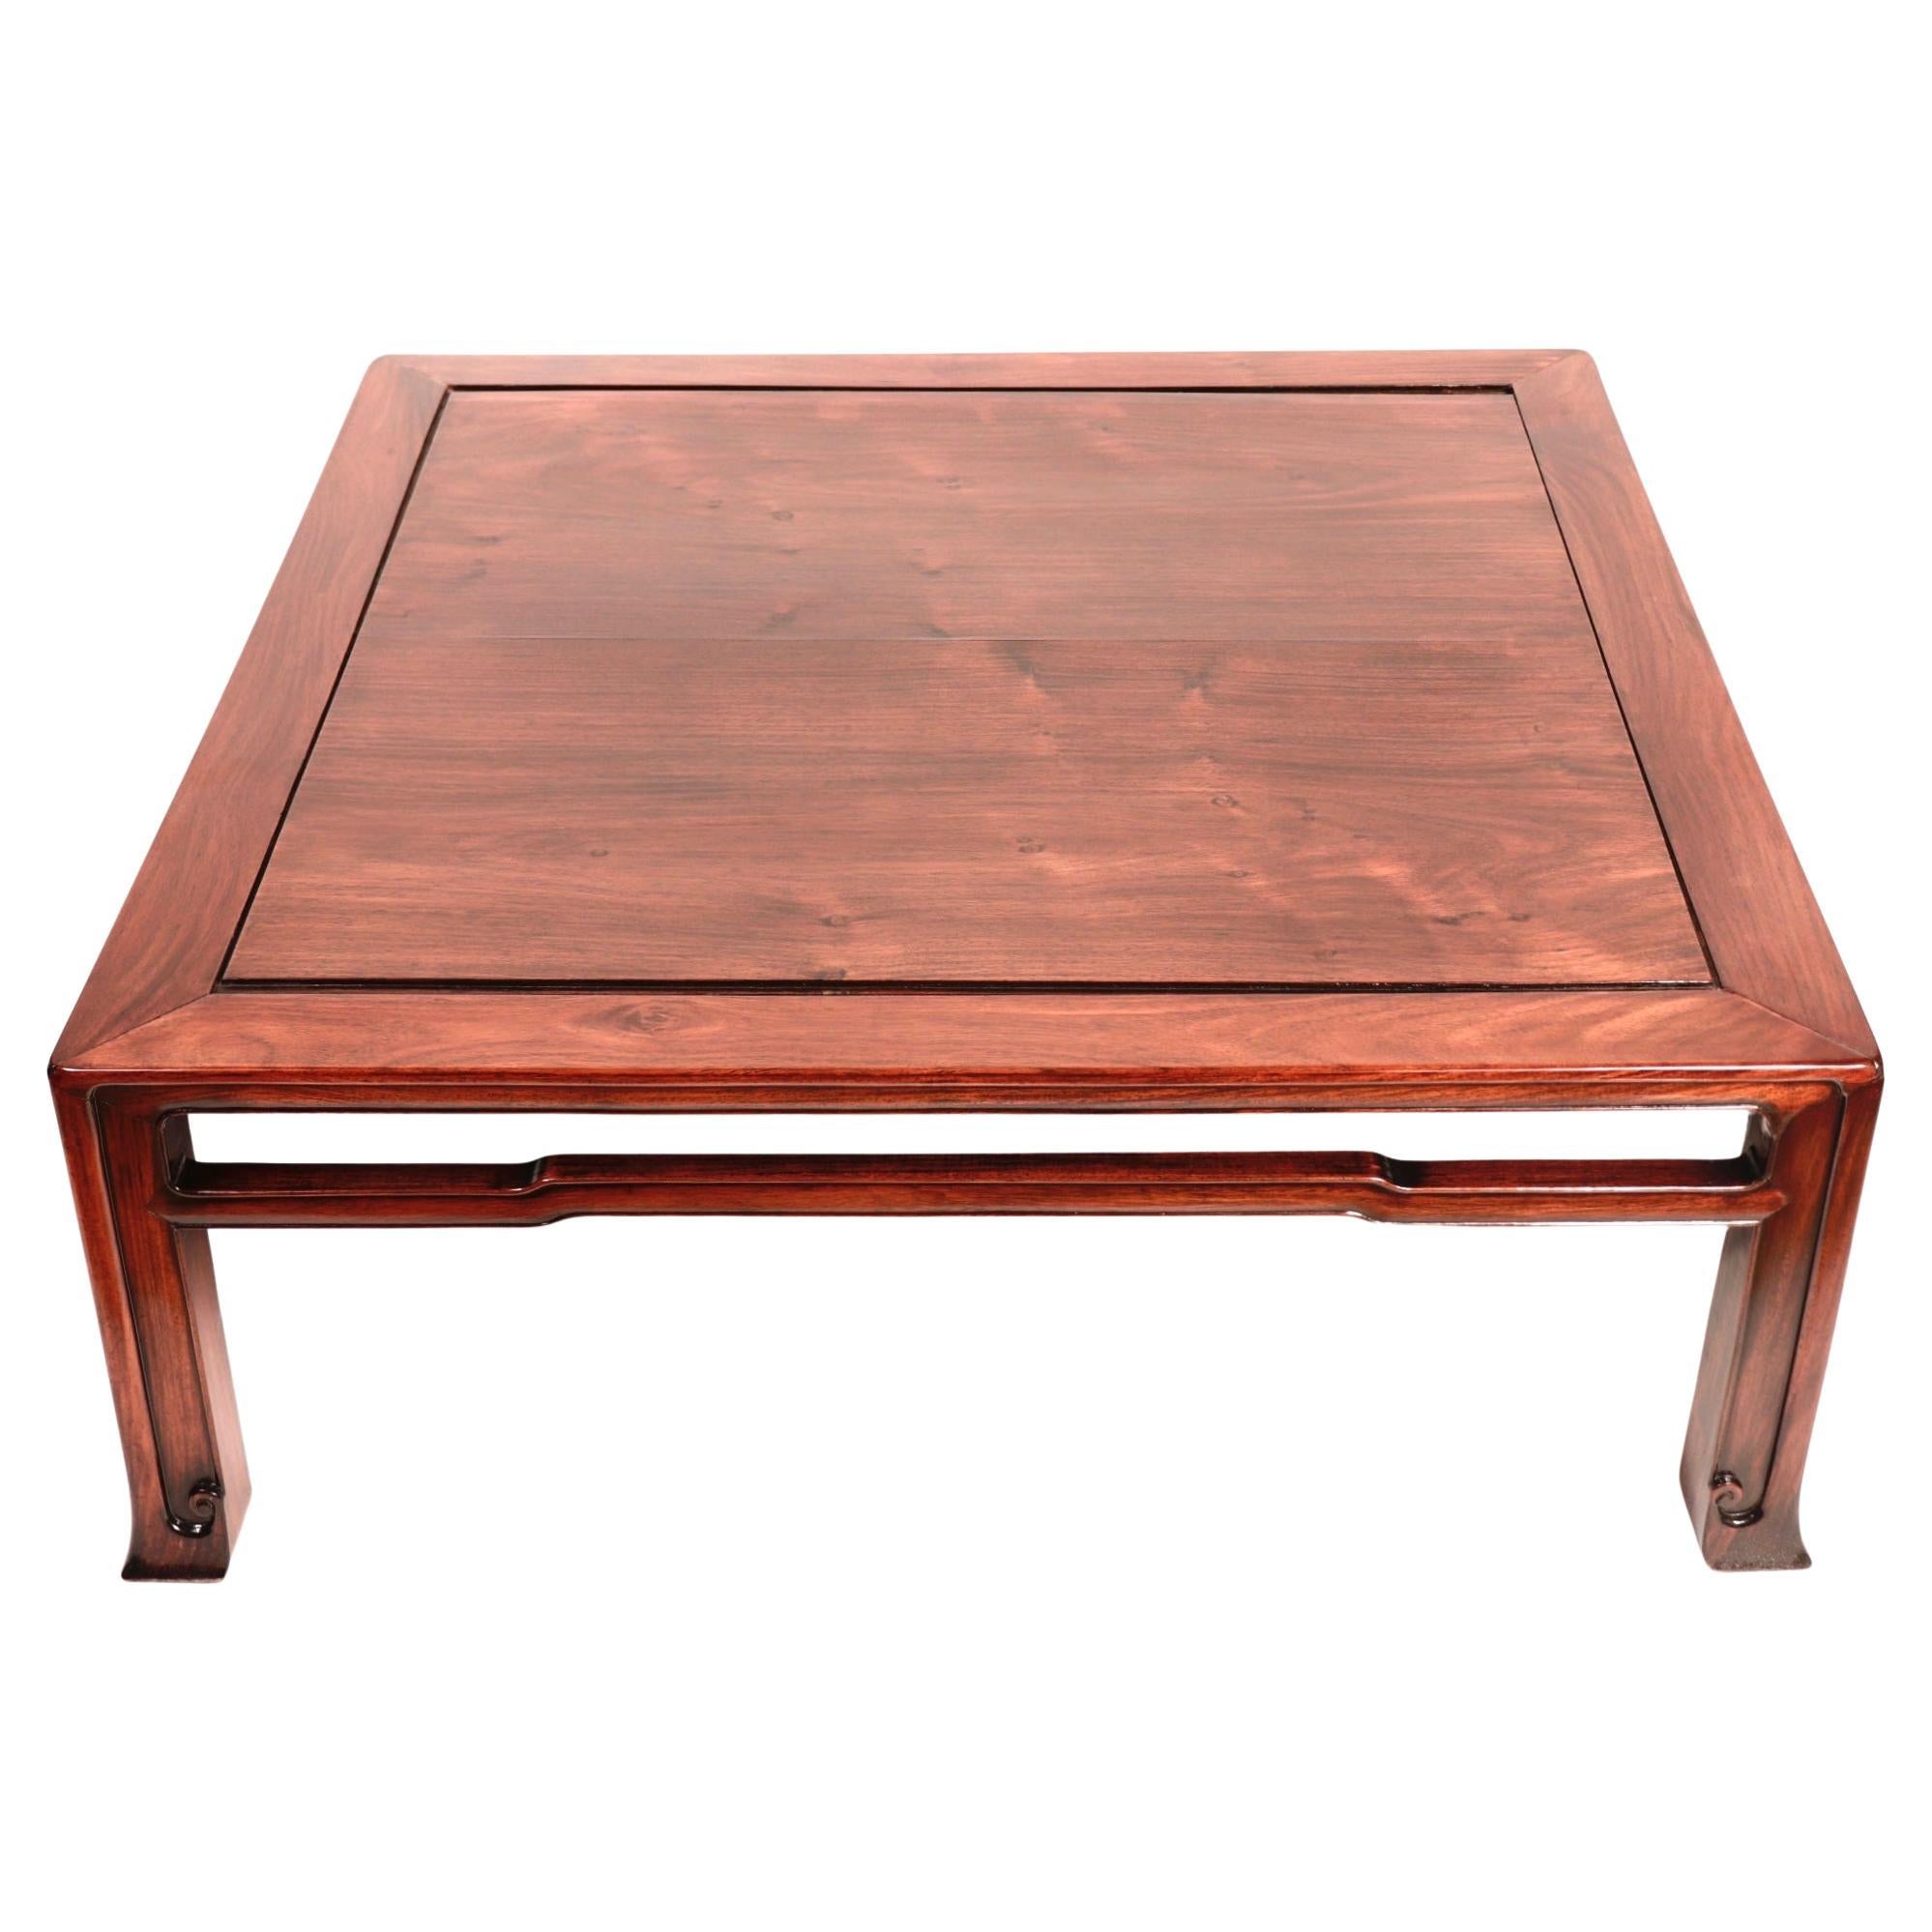 Japanese Rosewood Square Tea Table